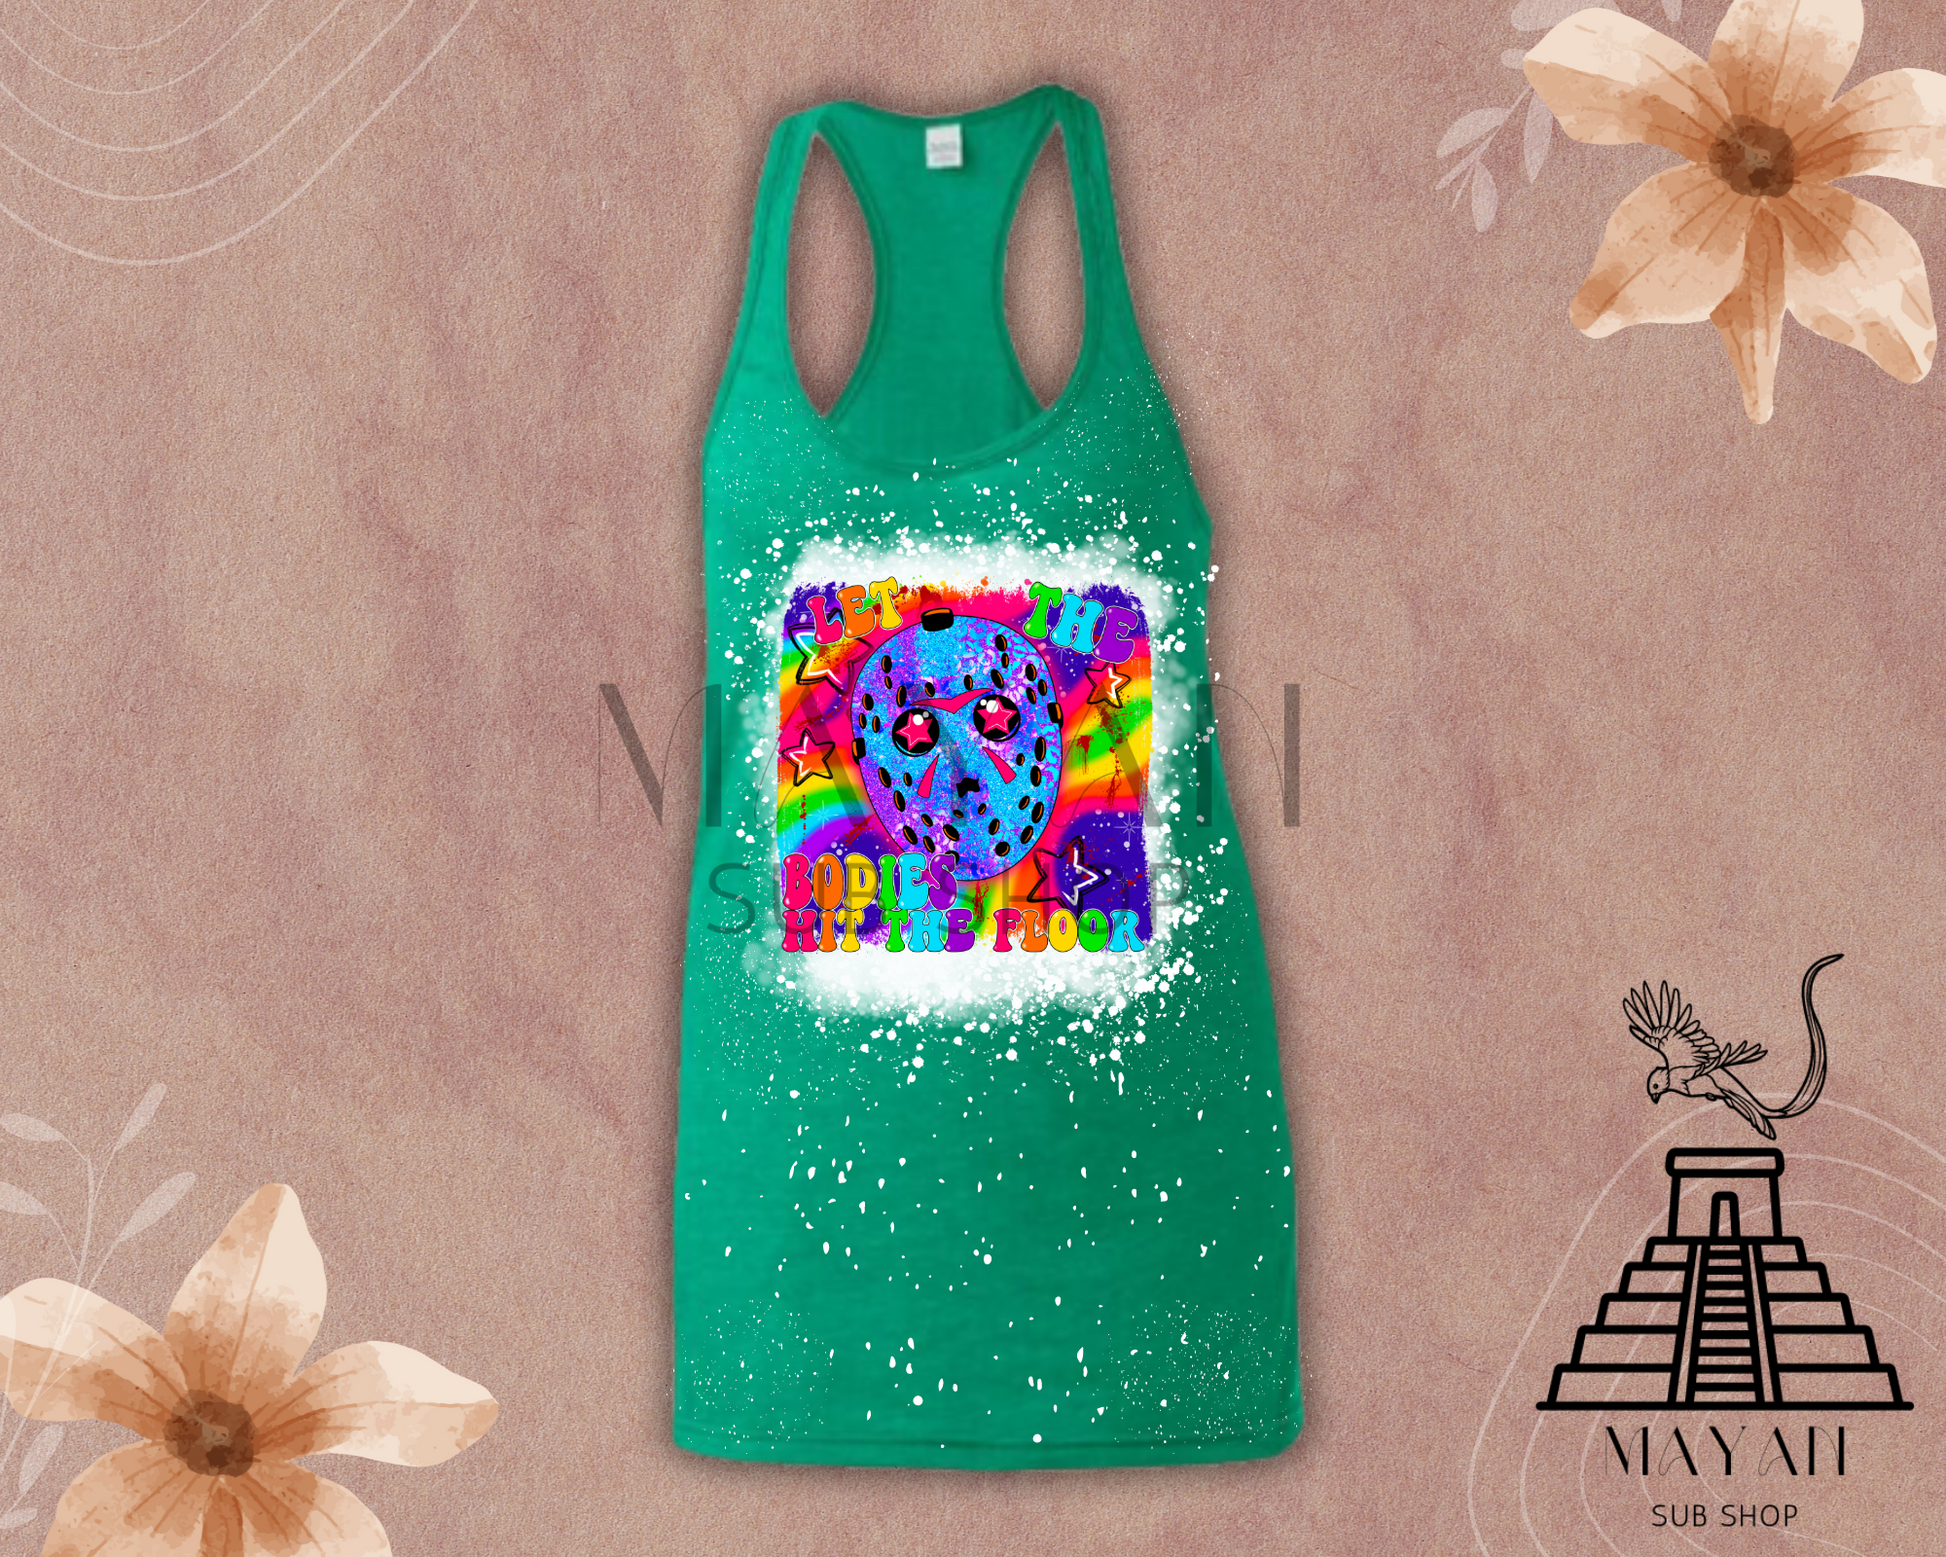 Let the bodies hit the floor tank top - Mayan Sub Shop